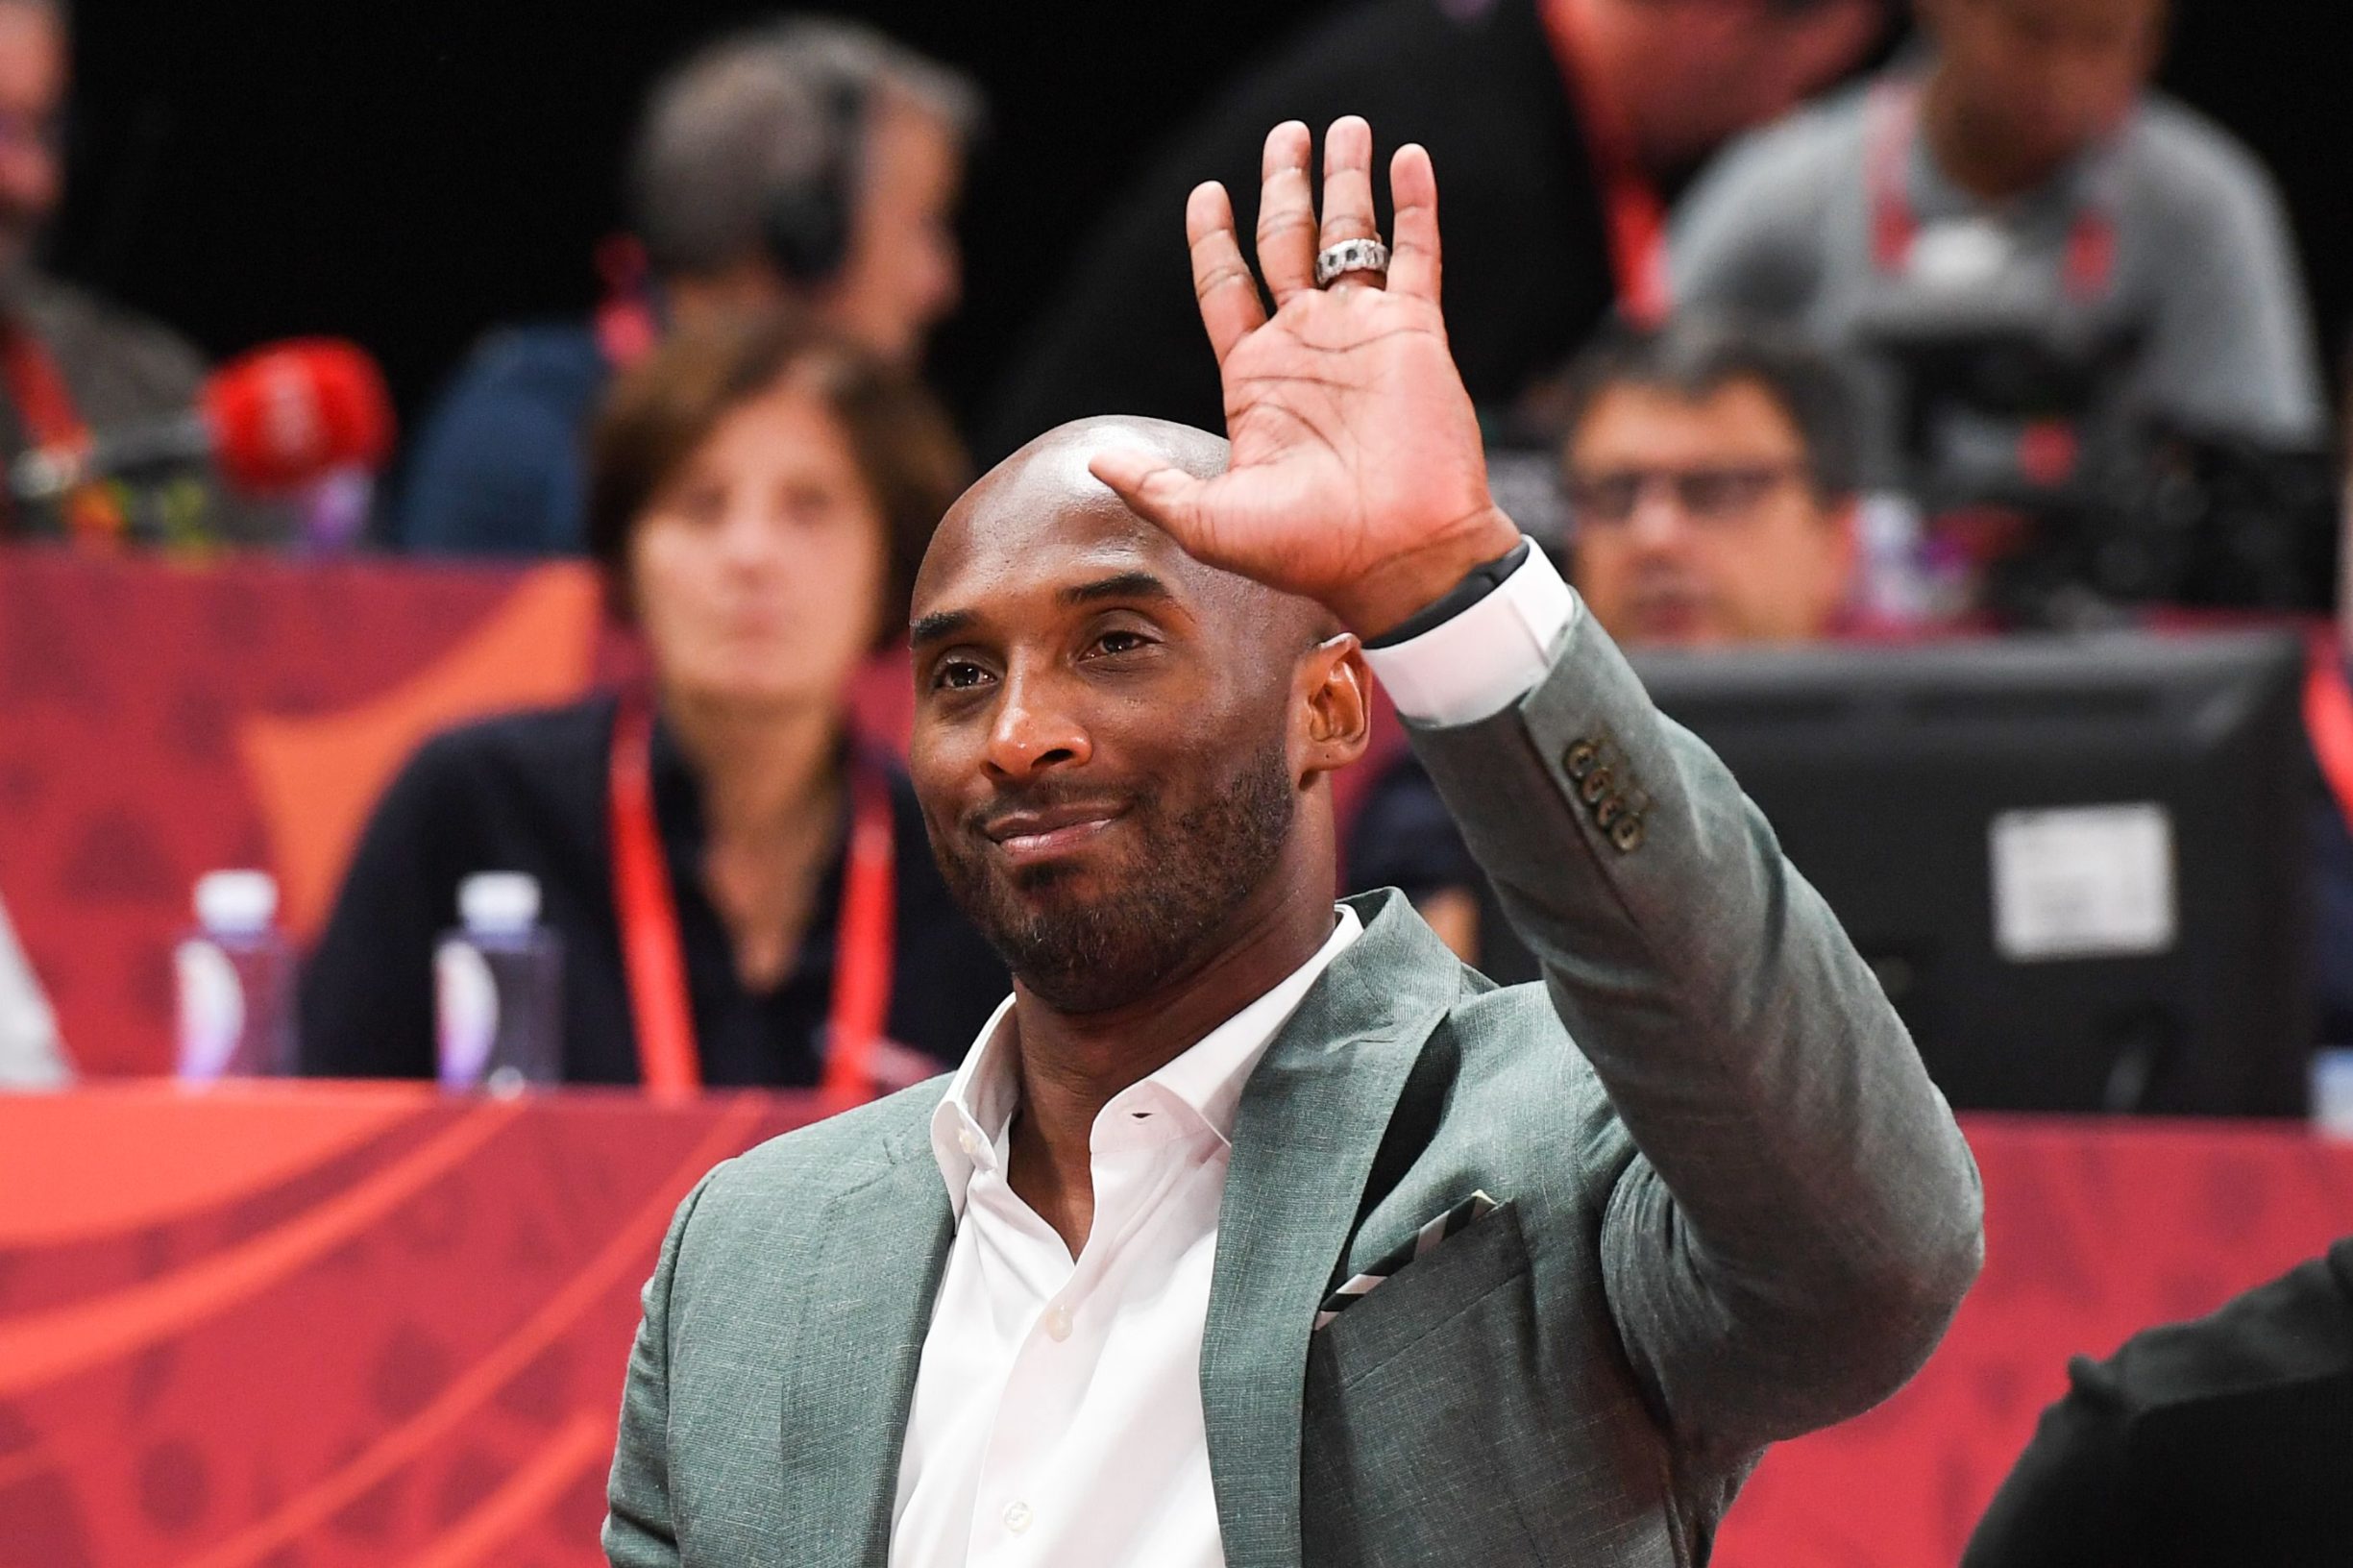 (FILES) In this file photo taken on September 13, 2019 former basketball player Kobe Bryant of the US waves at the crowd during the Basketball World Cup semi-final game between Australia and Spain in Beijing. - According to multiple US media sources,  Kobe Bryant died in a helicopter crash in Calabasas, California on January 26, 2020. (Photo by Greg BAKER / AFP)